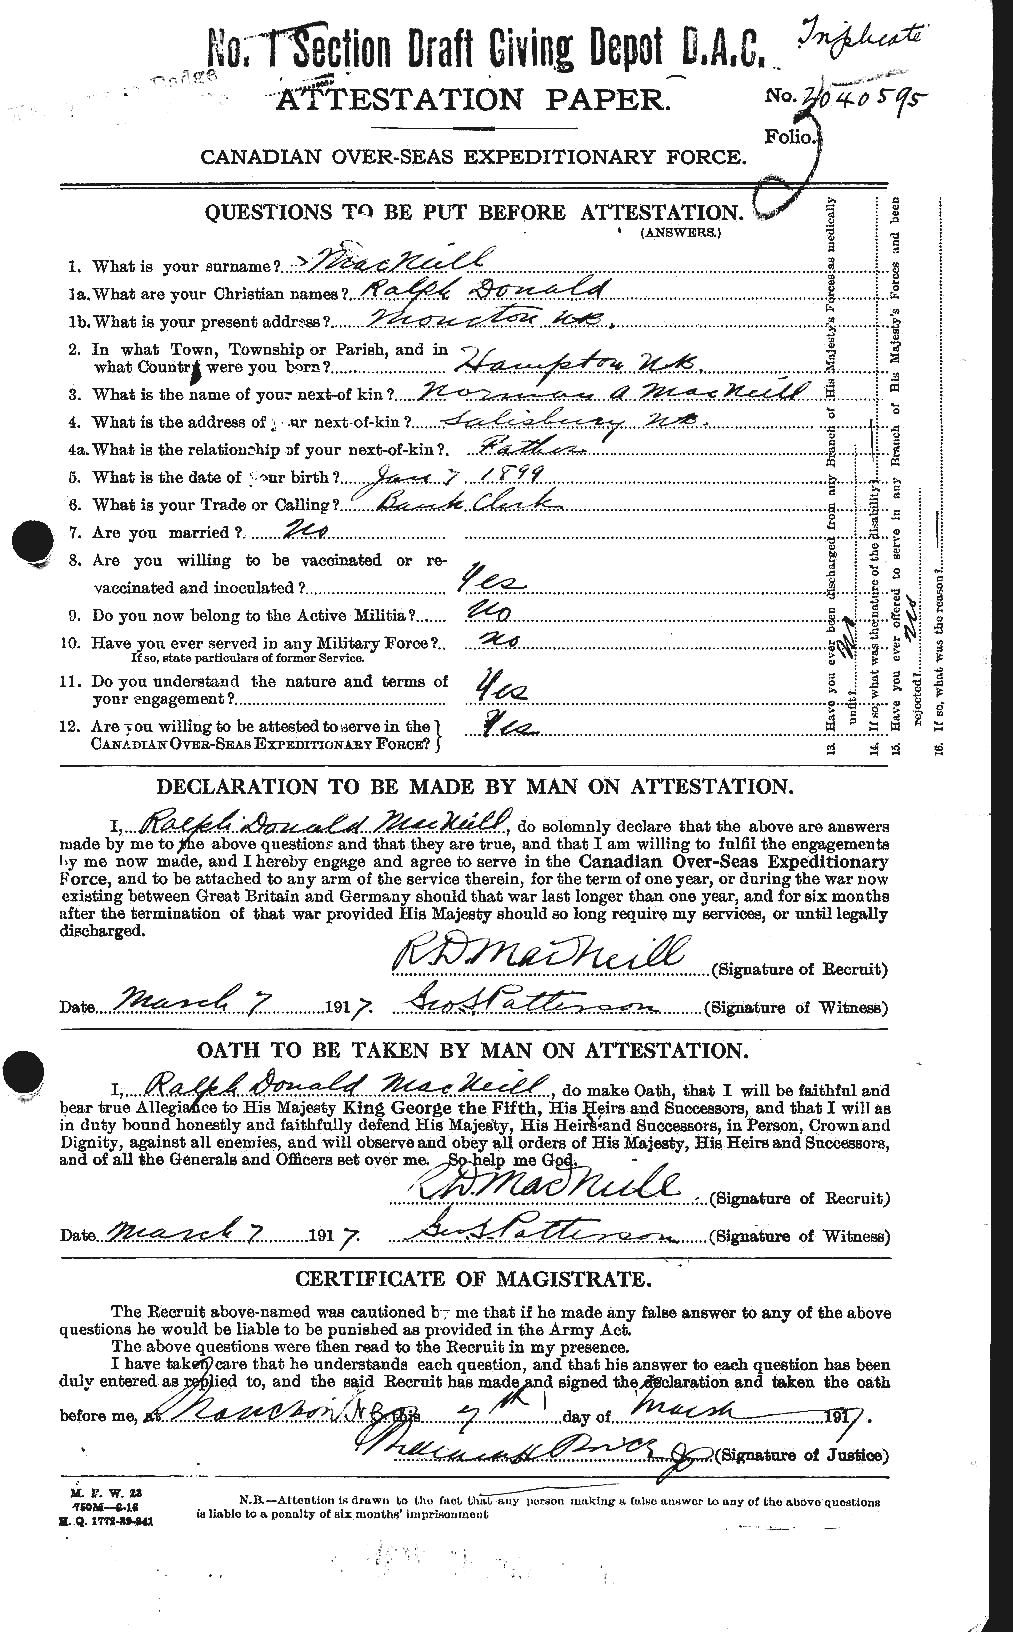 Personnel Records of the First World War - CEF 539024a